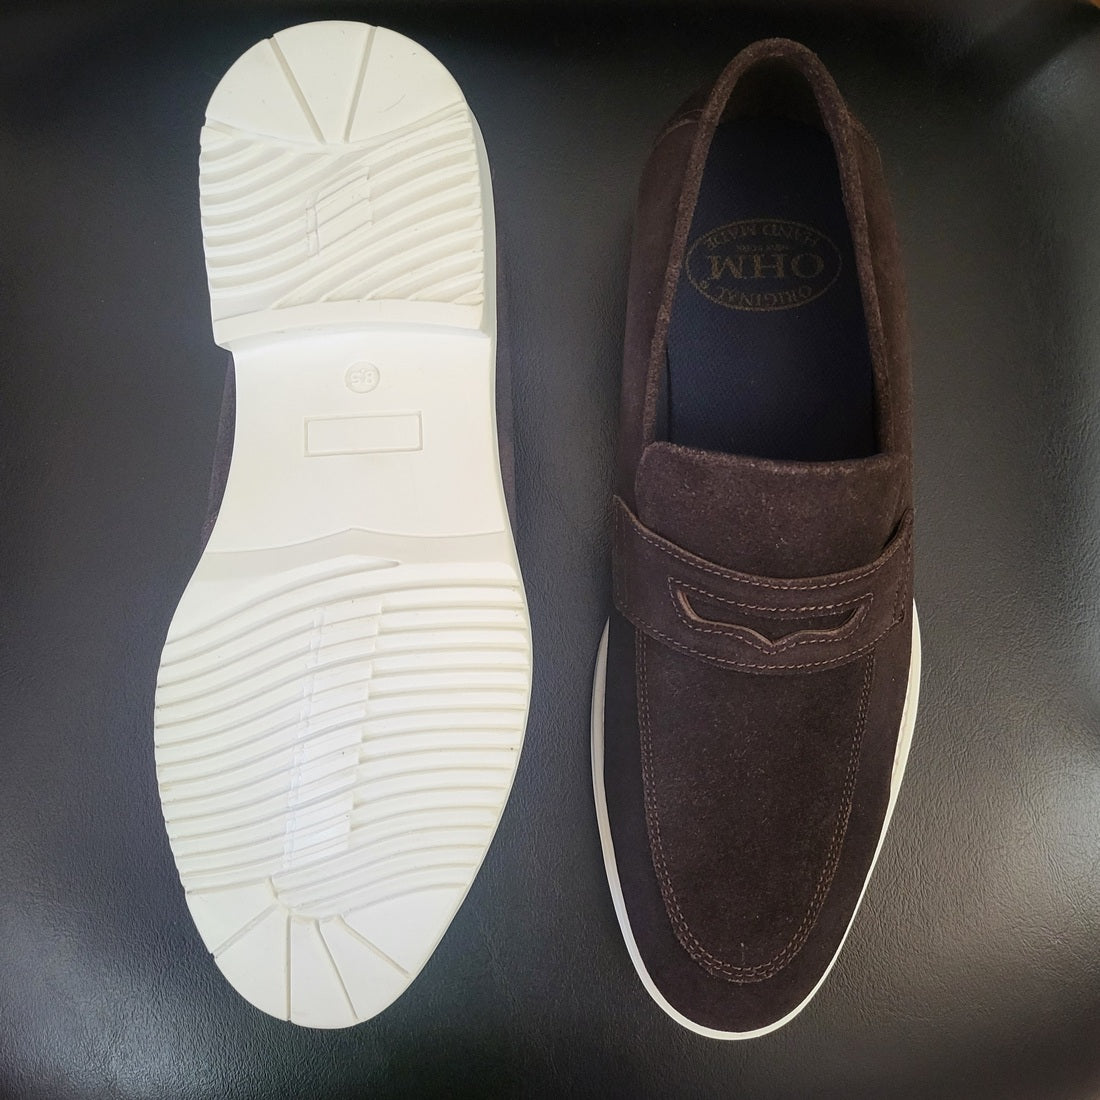 OHM New York Luxury Leather Business Penny Loafers